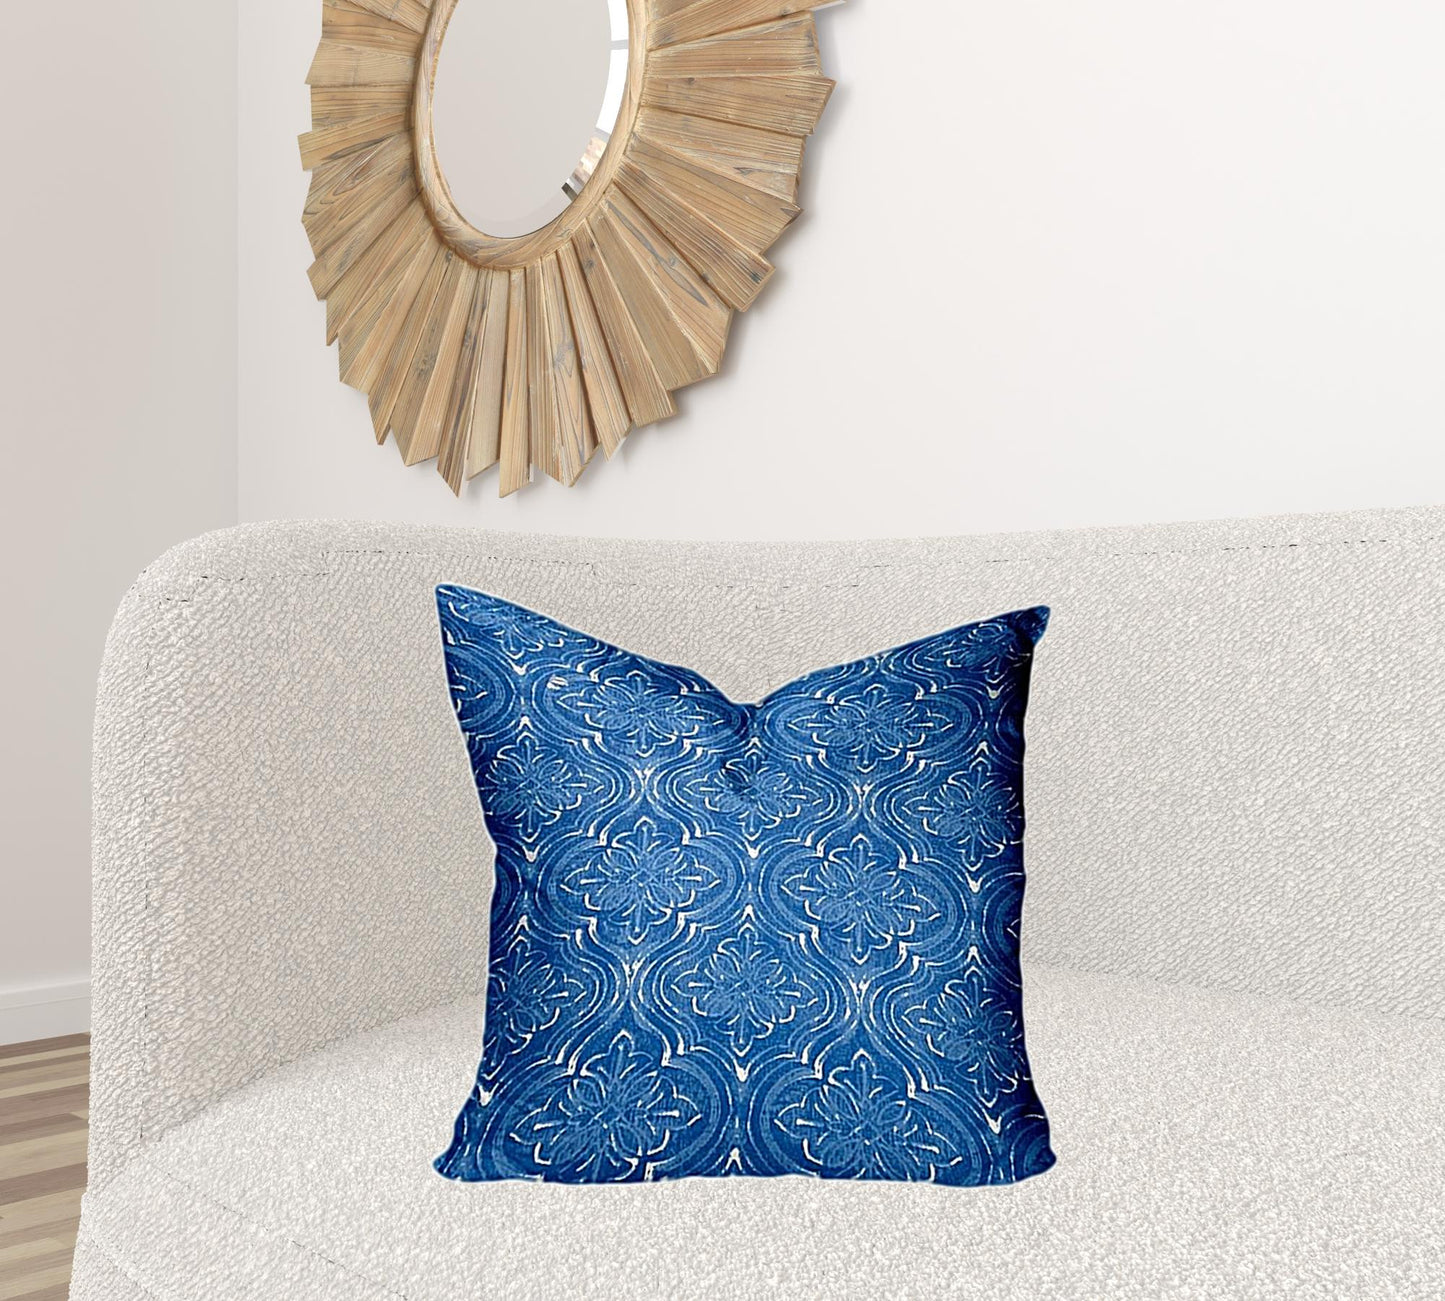 22" X 22" Blue And White Zippered Ikat Throw Indoor Outdoor Pillow